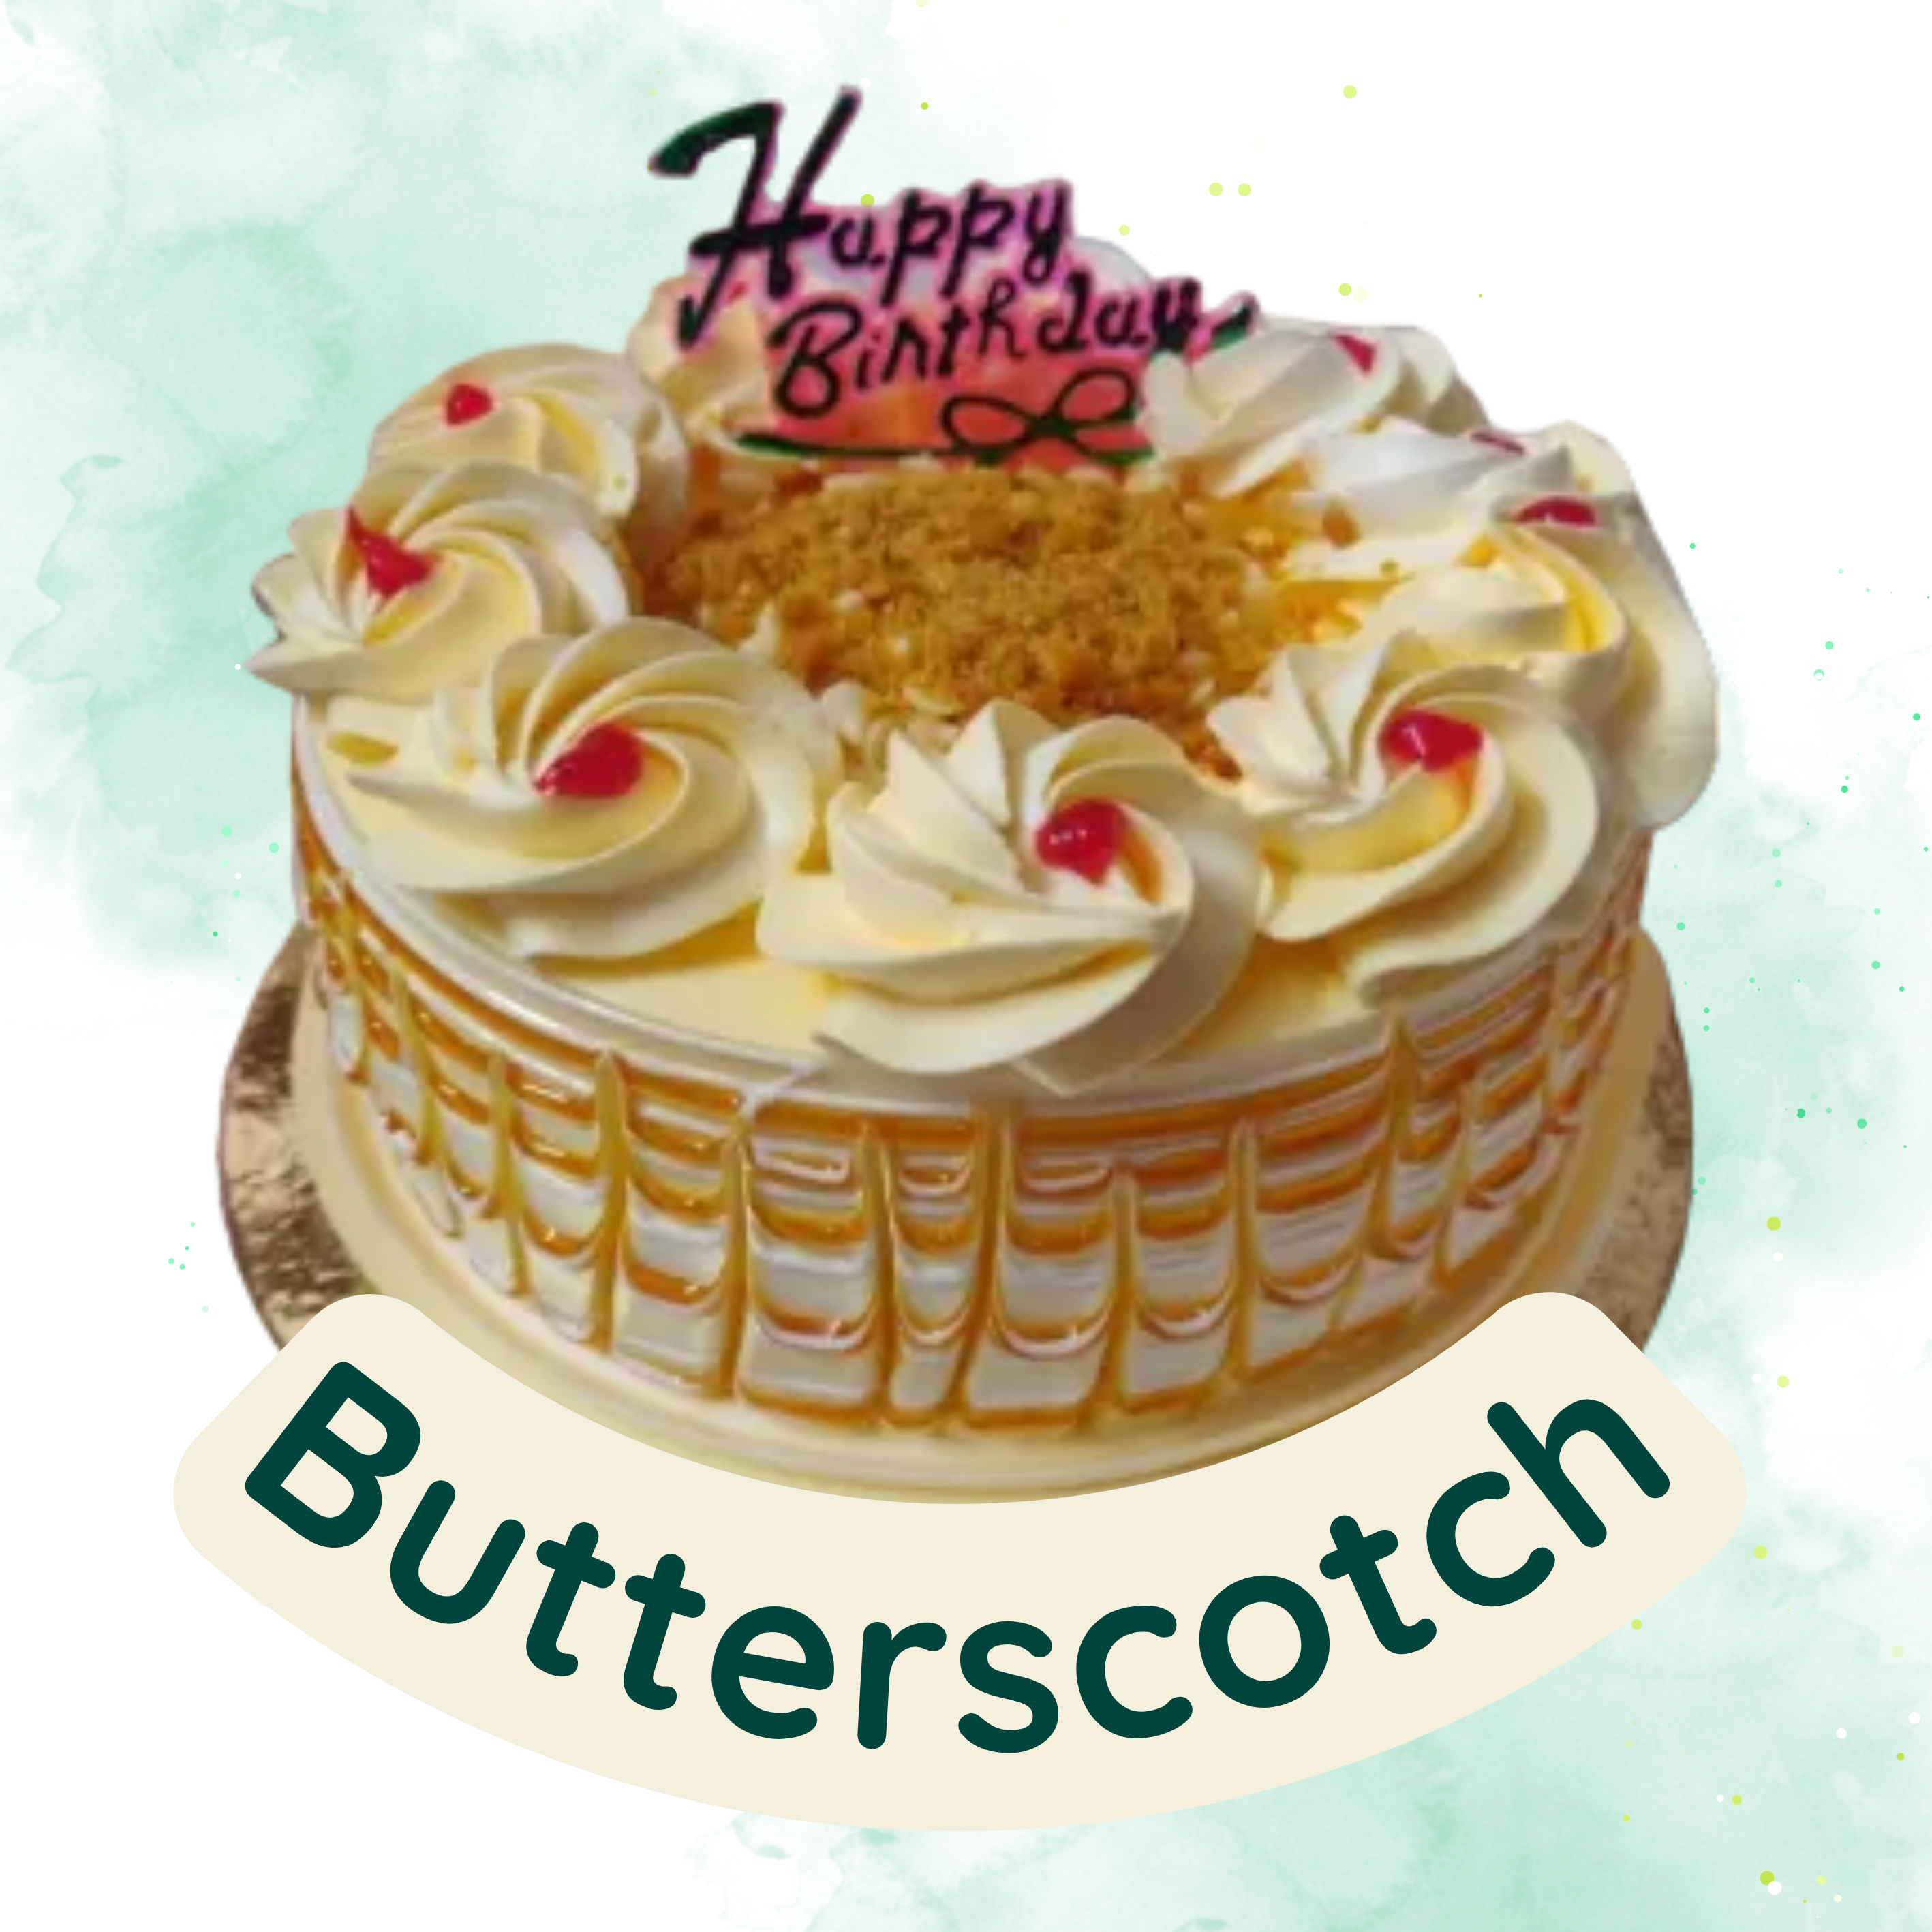 Buy/send Classic Butterscotch Cake order online in Anakapalle |  FirstWishMe.com